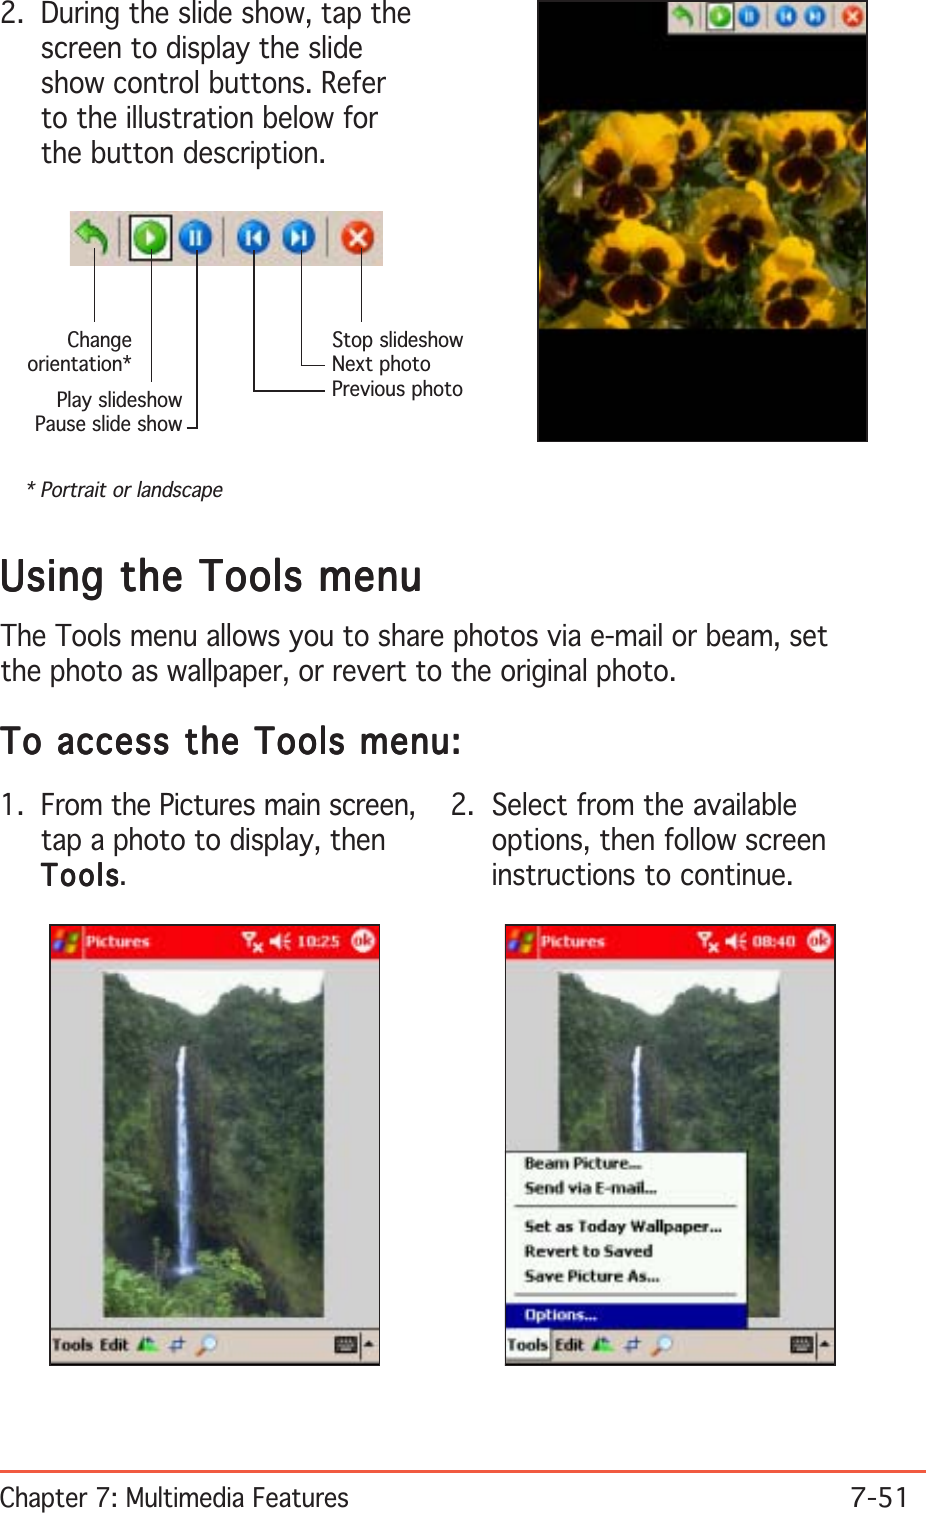 Chapter 7: Multimedia Features7-512. During the slide show, tap thescreen to display the slideshow control buttons. Referto the illustration below forthe button description.Stop slideshowNext photoPrevious photoPlay slideshowPause slide showChangeorientation** Portrait or landscapeUsing the Tools menuUsing the Tools menuUsing the Tools menuUsing the Tools menuUsing the Tools menuThe Tools menu allows you to share photos via e-mail or beam, setthe photo as wallpaper, or revert to the original photo.To access the Tools menu:To access the Tools menu:To access the Tools menu:To access the Tools menu:To access the Tools menu:1. From the Pictures main screen,tap a photo to display, thenToolsToolsToolsToolsTools.2. Select from the availableoptions, then follow screeninstructions to continue.